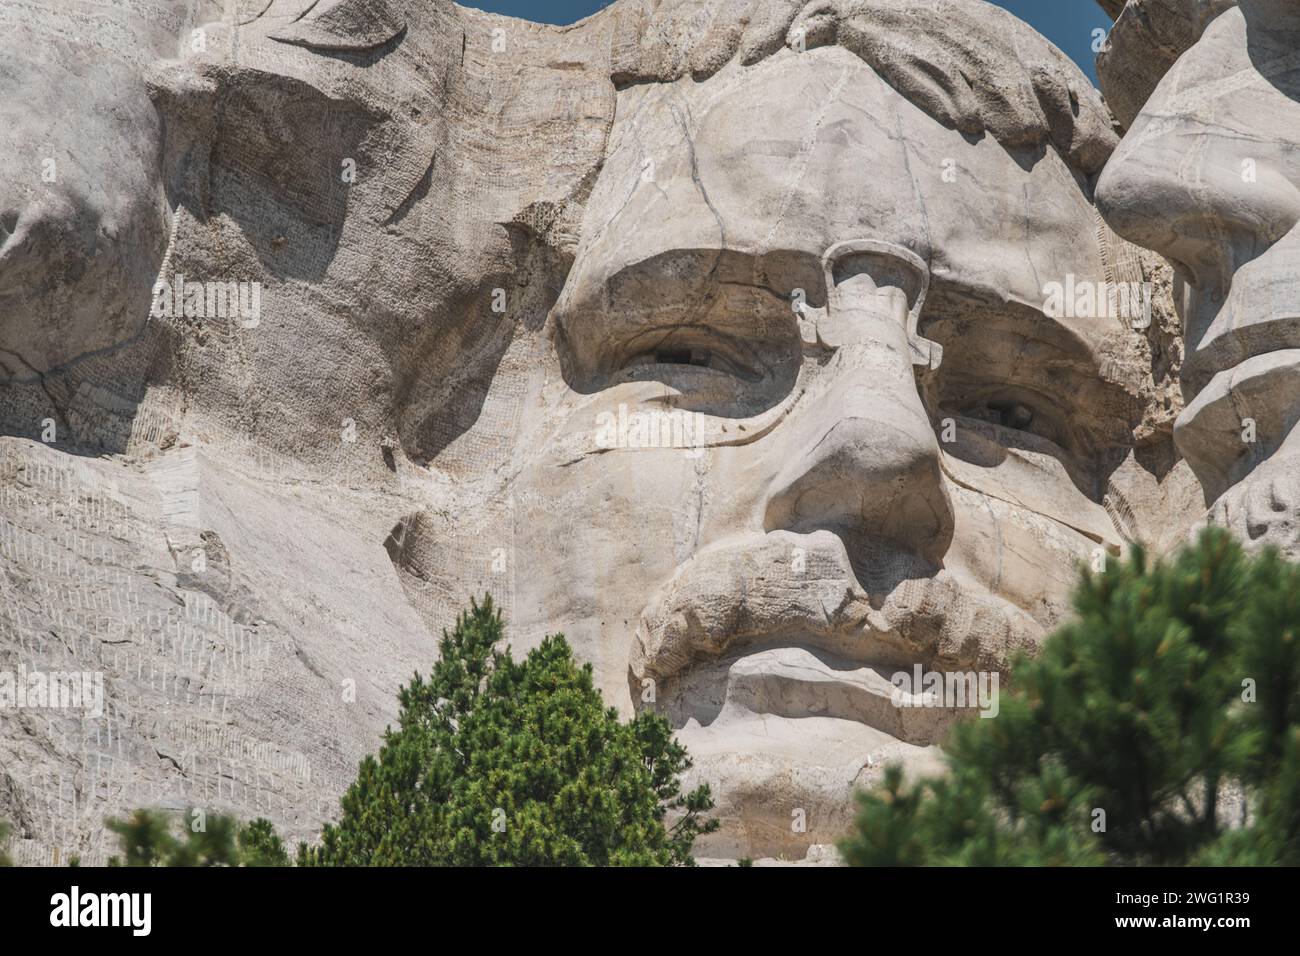 Close-up view of Theodore Roosevelt carved into the mountainside at Mt. Rushmore Stock Photo